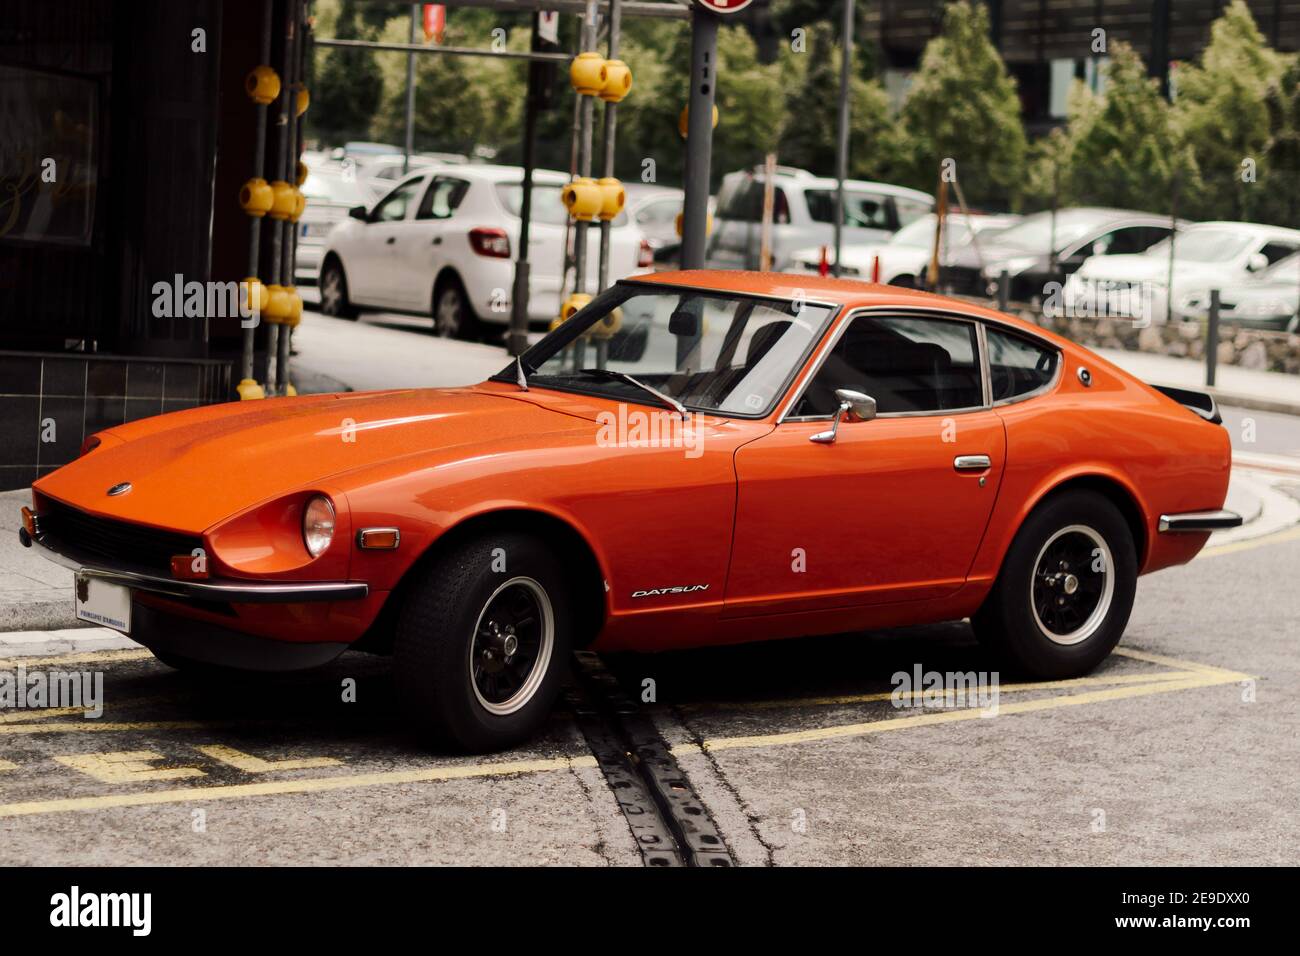 ANDORRA, ANDORRA - Aug 08, 2015: Selective Focus - side view of the classic car Datsun 240Z by Nissan, parked in Andorra in a rainy day. Classic sport Stock Photo